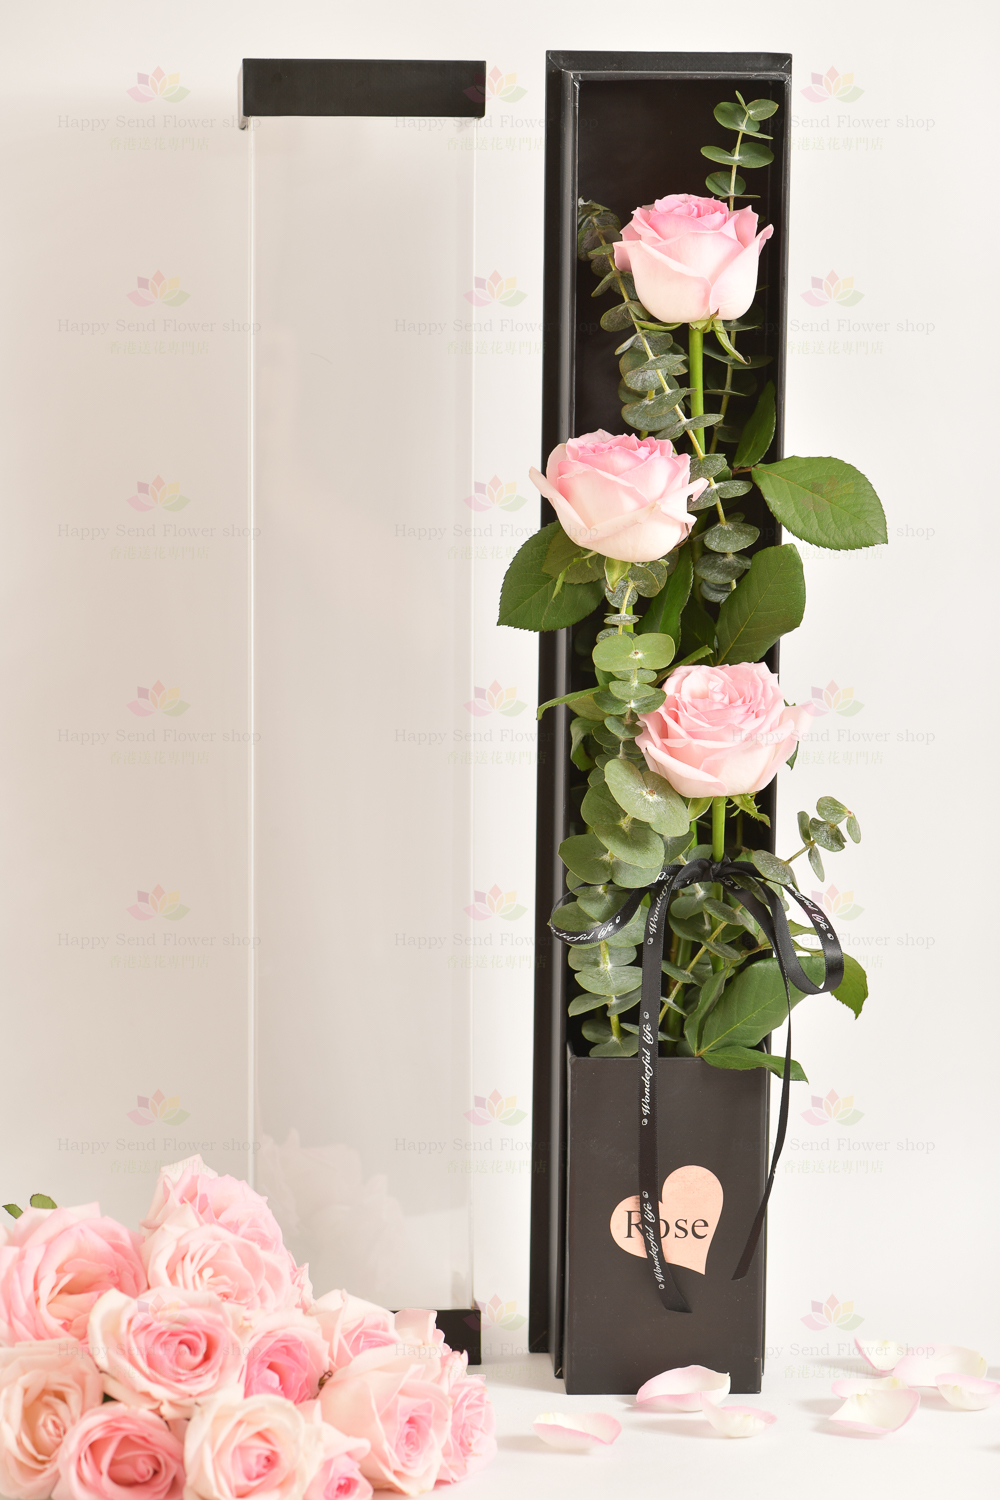 3 stems imported rose gift box (3 stems pink roses, eucalyptus)